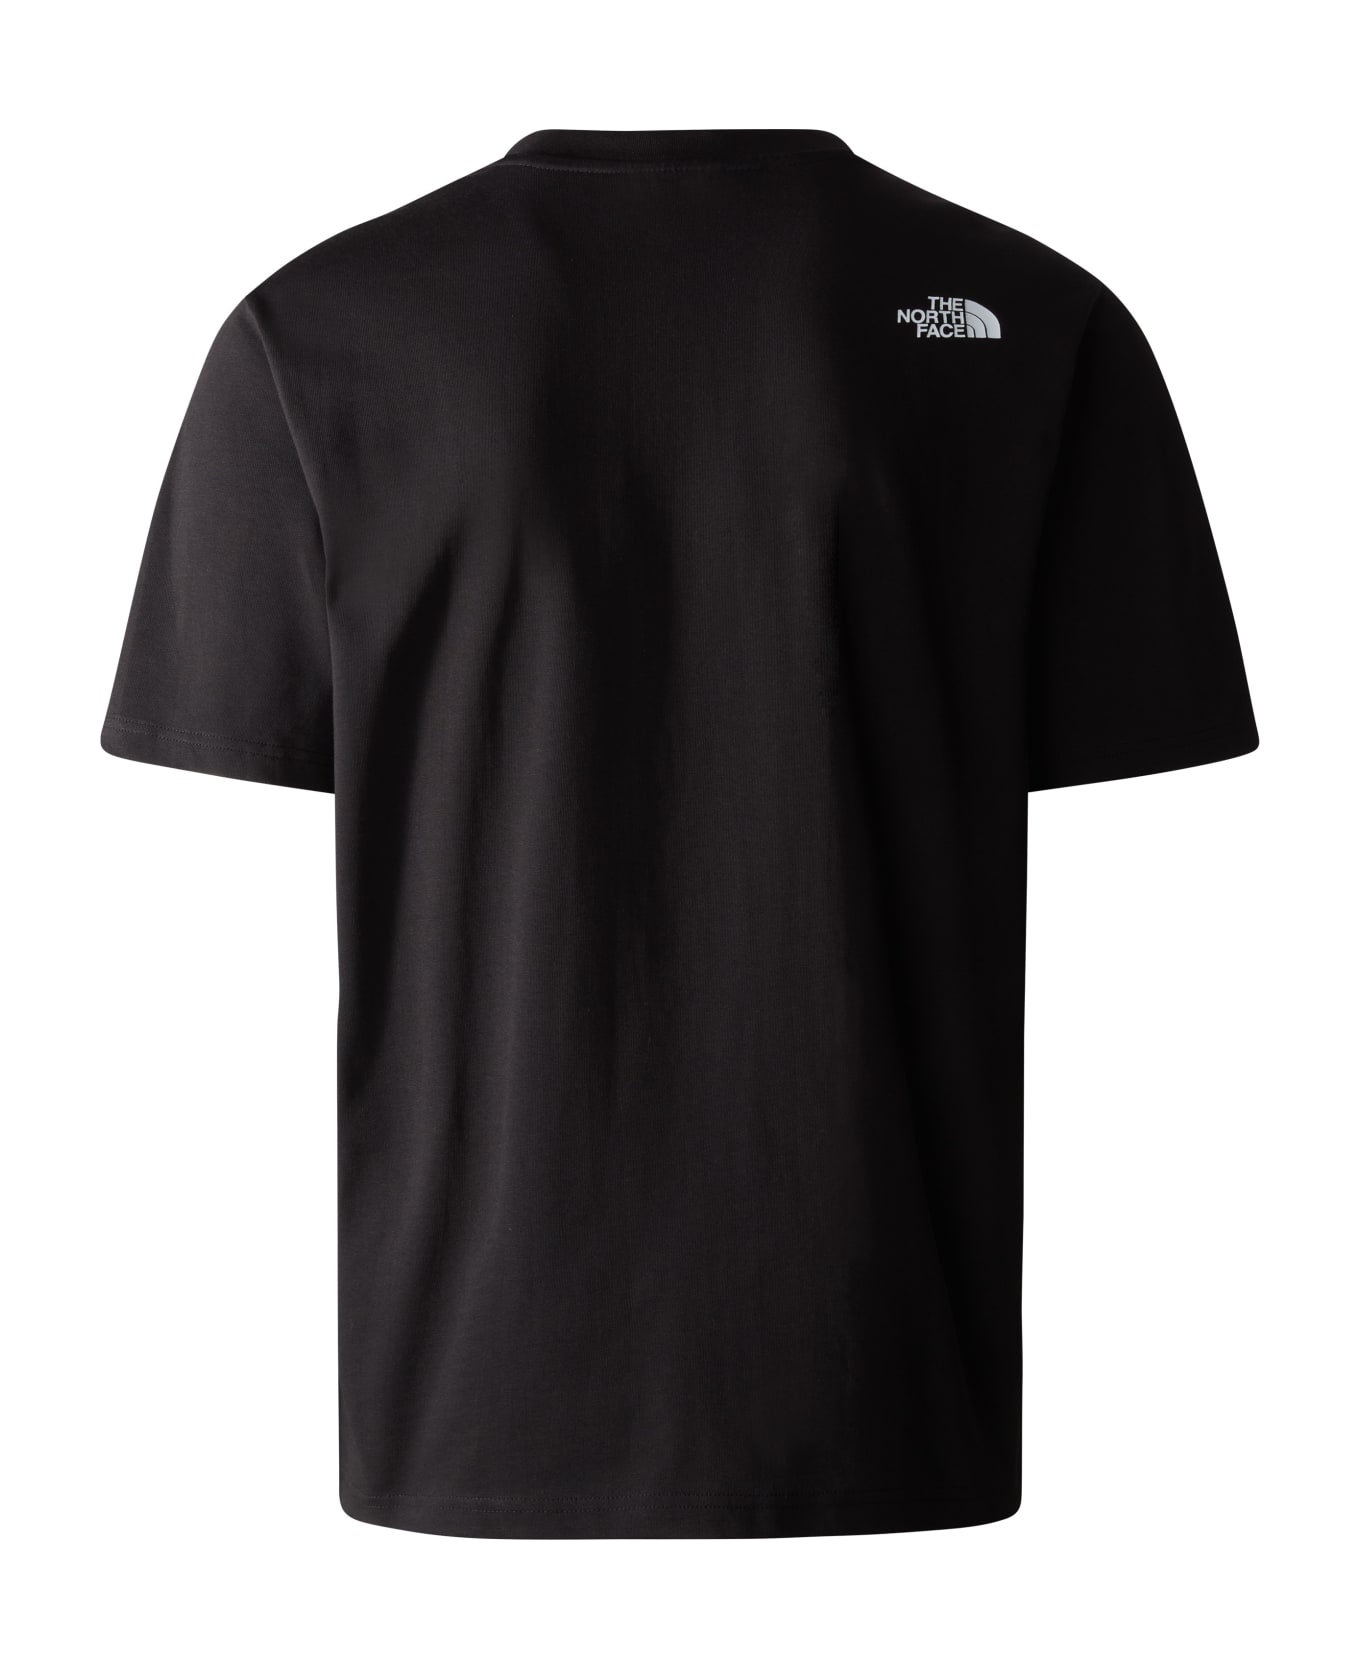 The North Face M Nse Patch Tee - Tnf Black